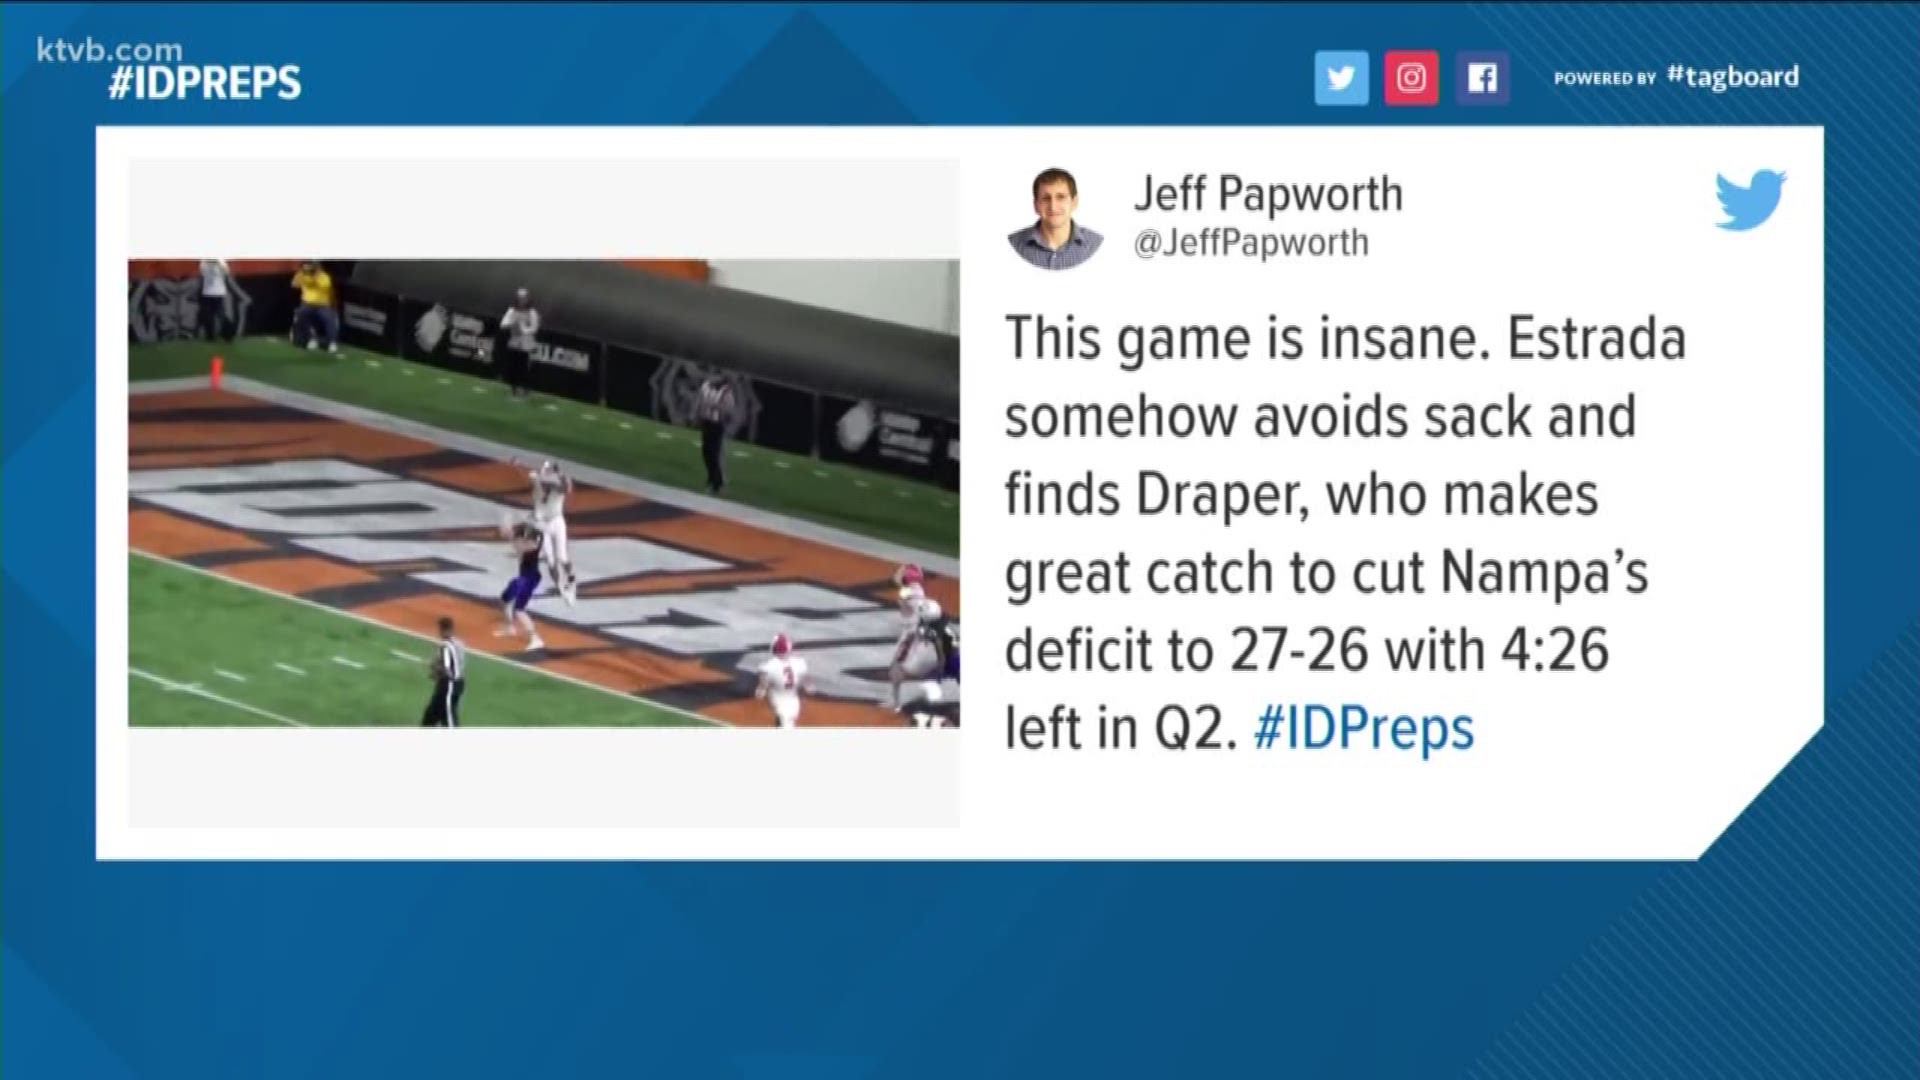 The play was shown on the "You Got Mossed" segment during "Monday Night Countdown," and was sandwiched between a pair of NFL plays.